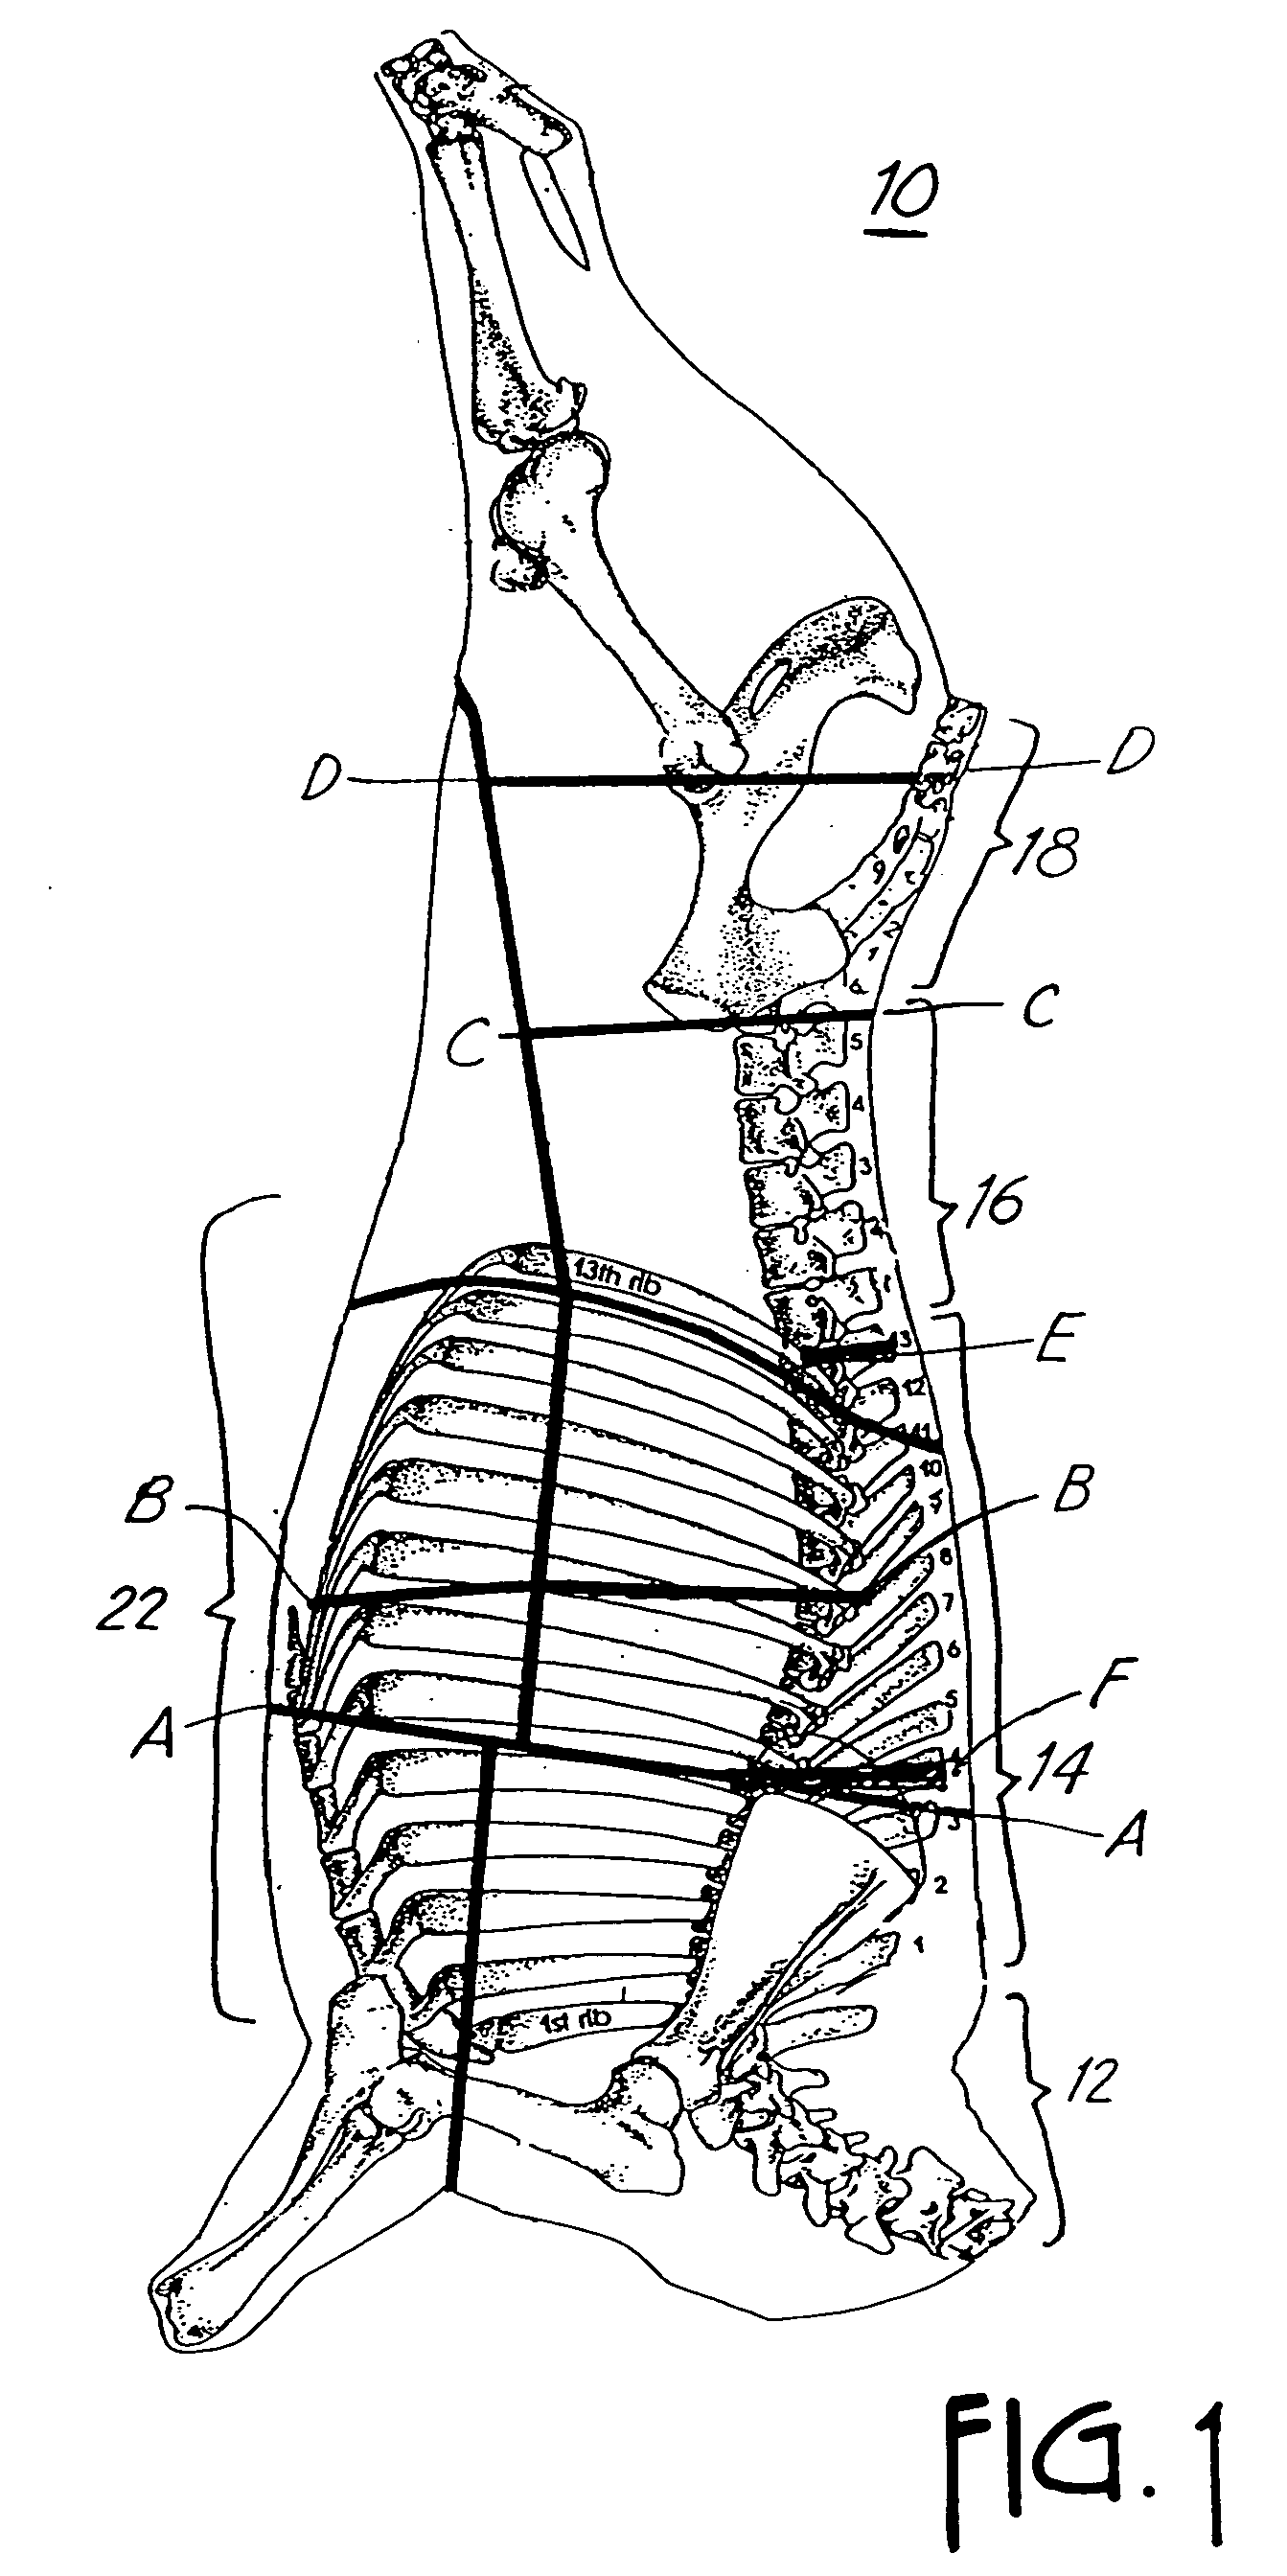 Method and apparatus for tenderizing meat